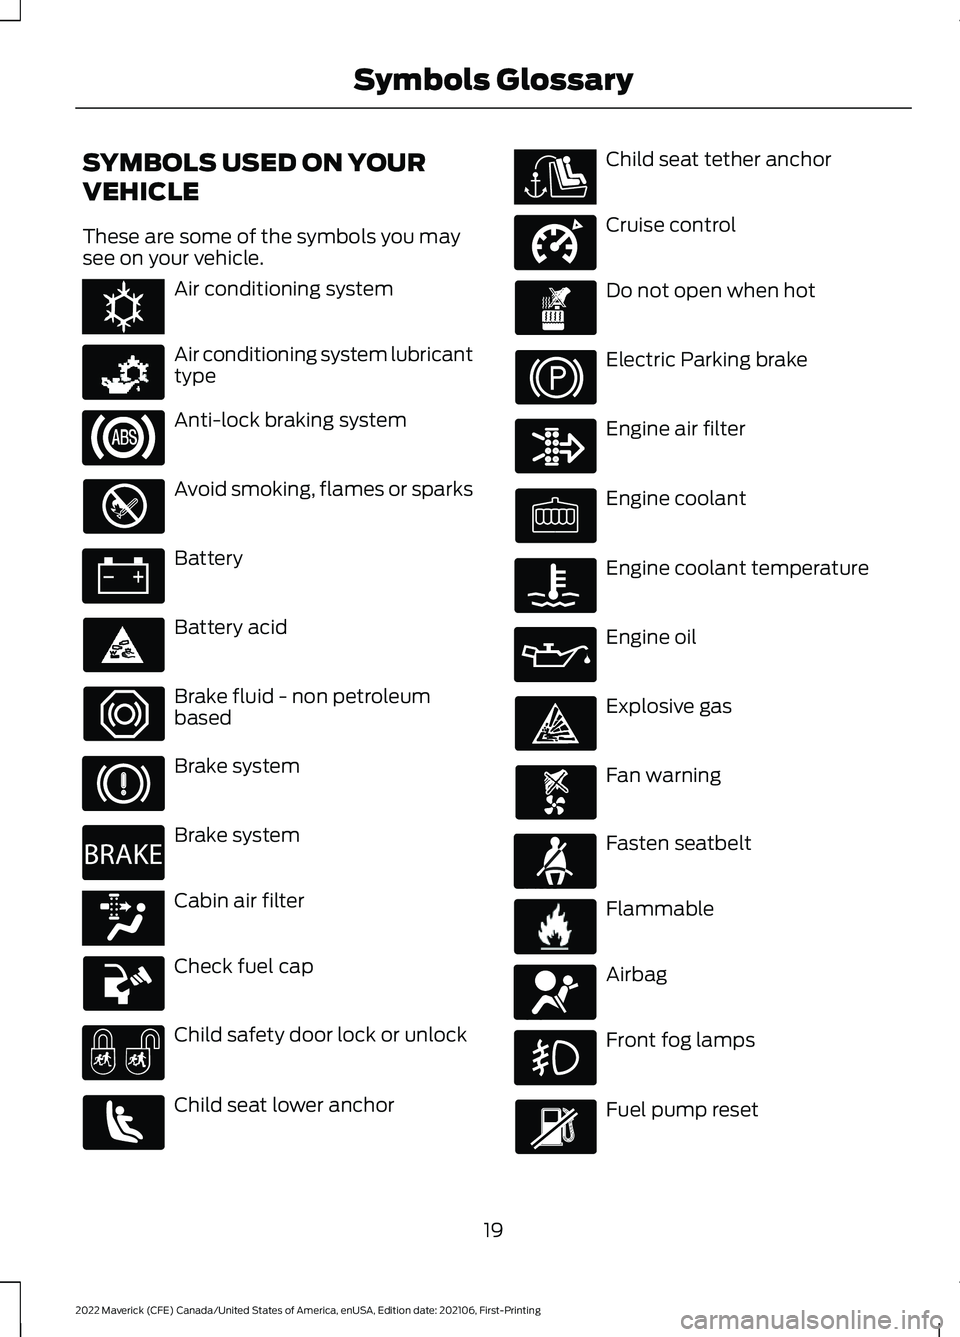 FORD MAVERICK 2022  Owners Manual SYMBOLS USED ON YOUR
VEHICLE
These are some of the symbols you may
see on your vehicle.
Air conditioning system
Air conditioning system lubricant
type
Anti-lock braking system
Avoid smoking, flames or